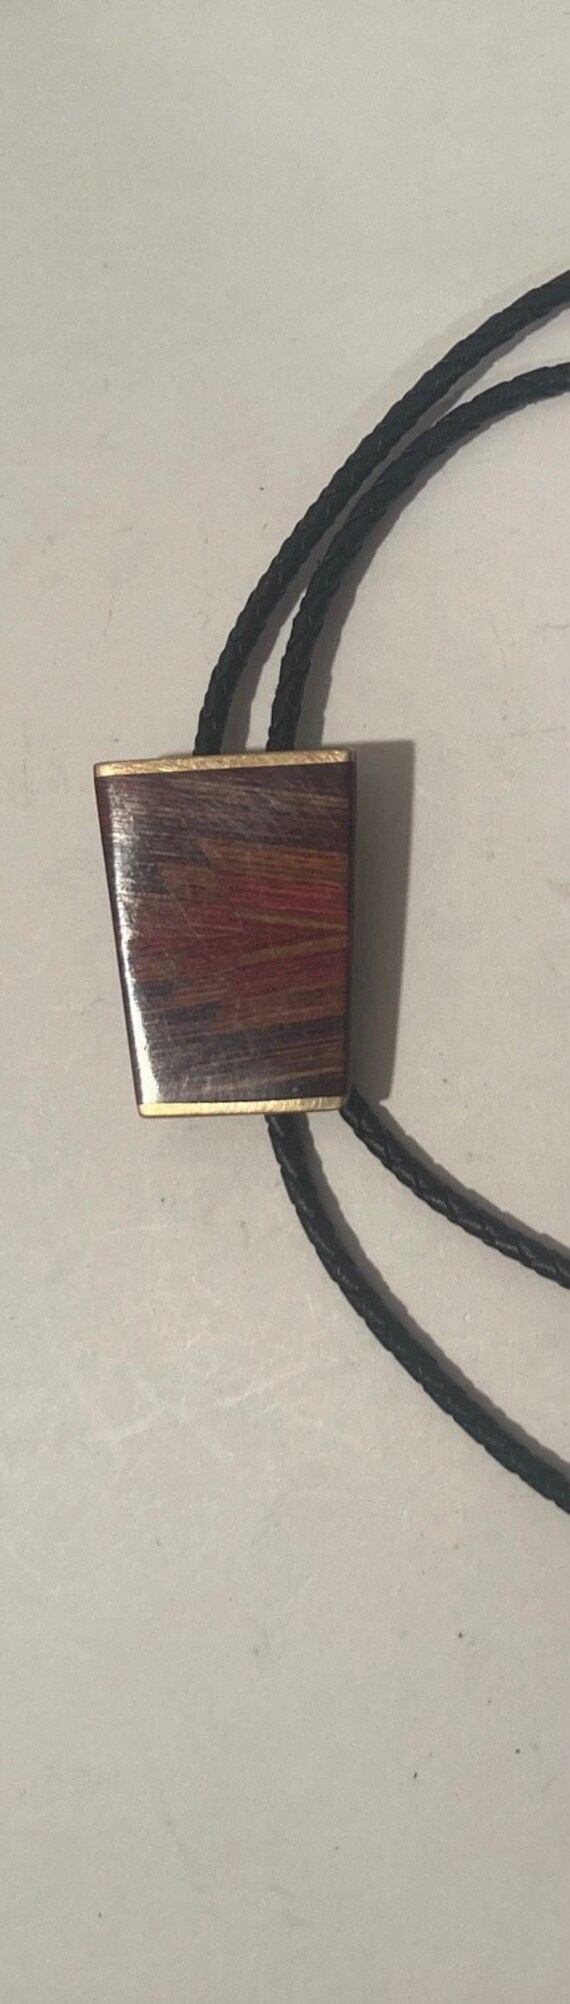 Vintage Metal Bolo Tie, Nice Brass and Wooden Styl